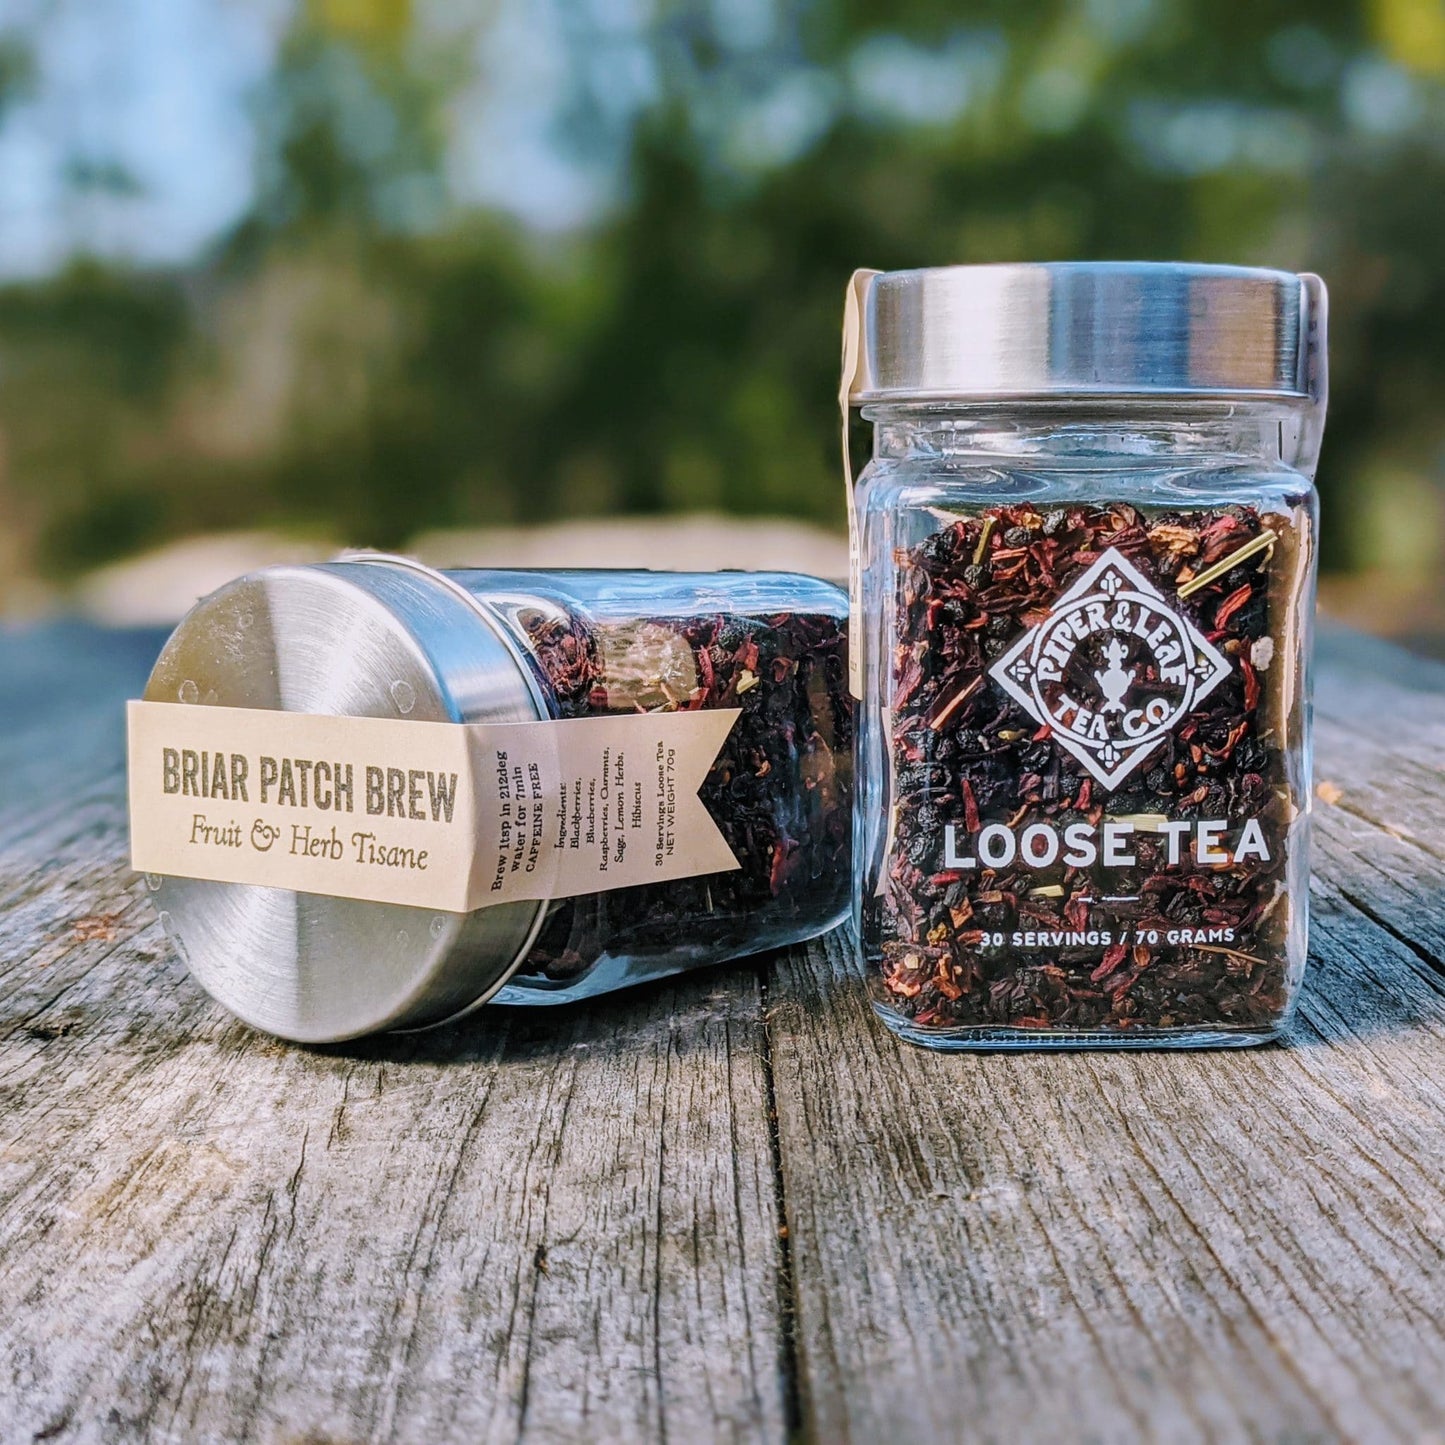 Two glass jars of loose leaf (Briar Patch Brew)